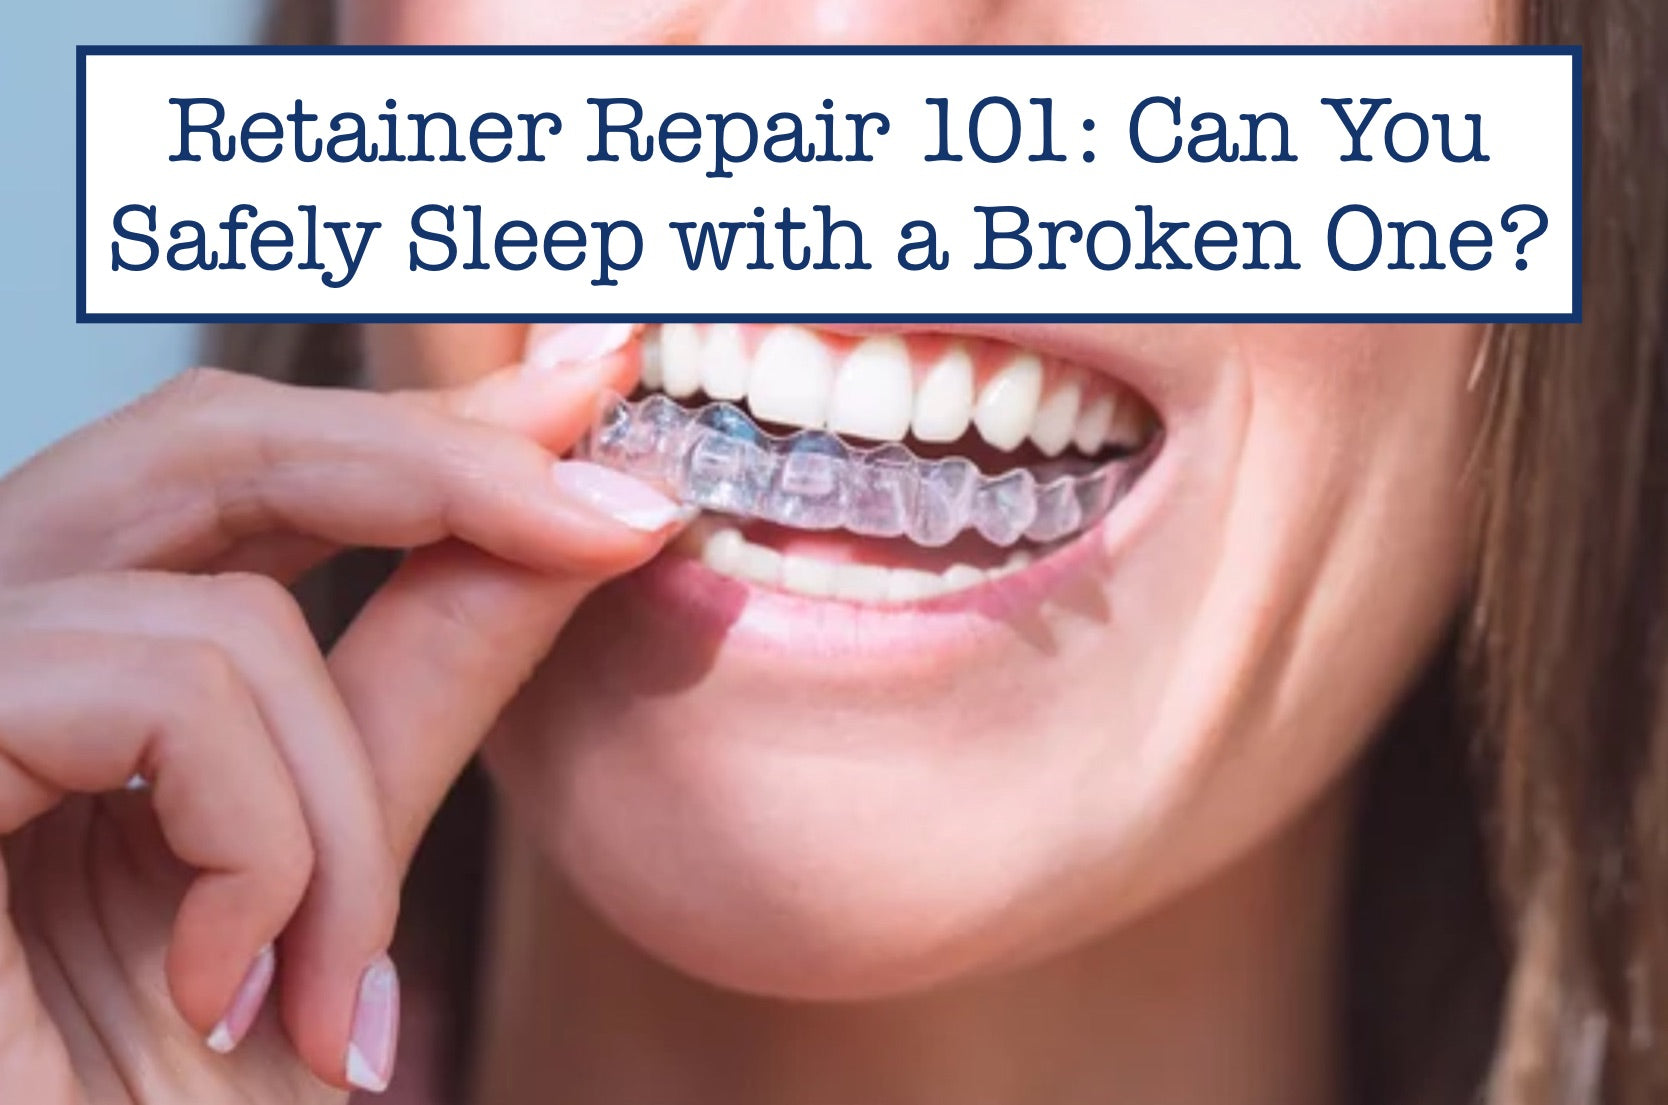 Retainer Repair 101: Can You Safely Sleep with a Broken One?